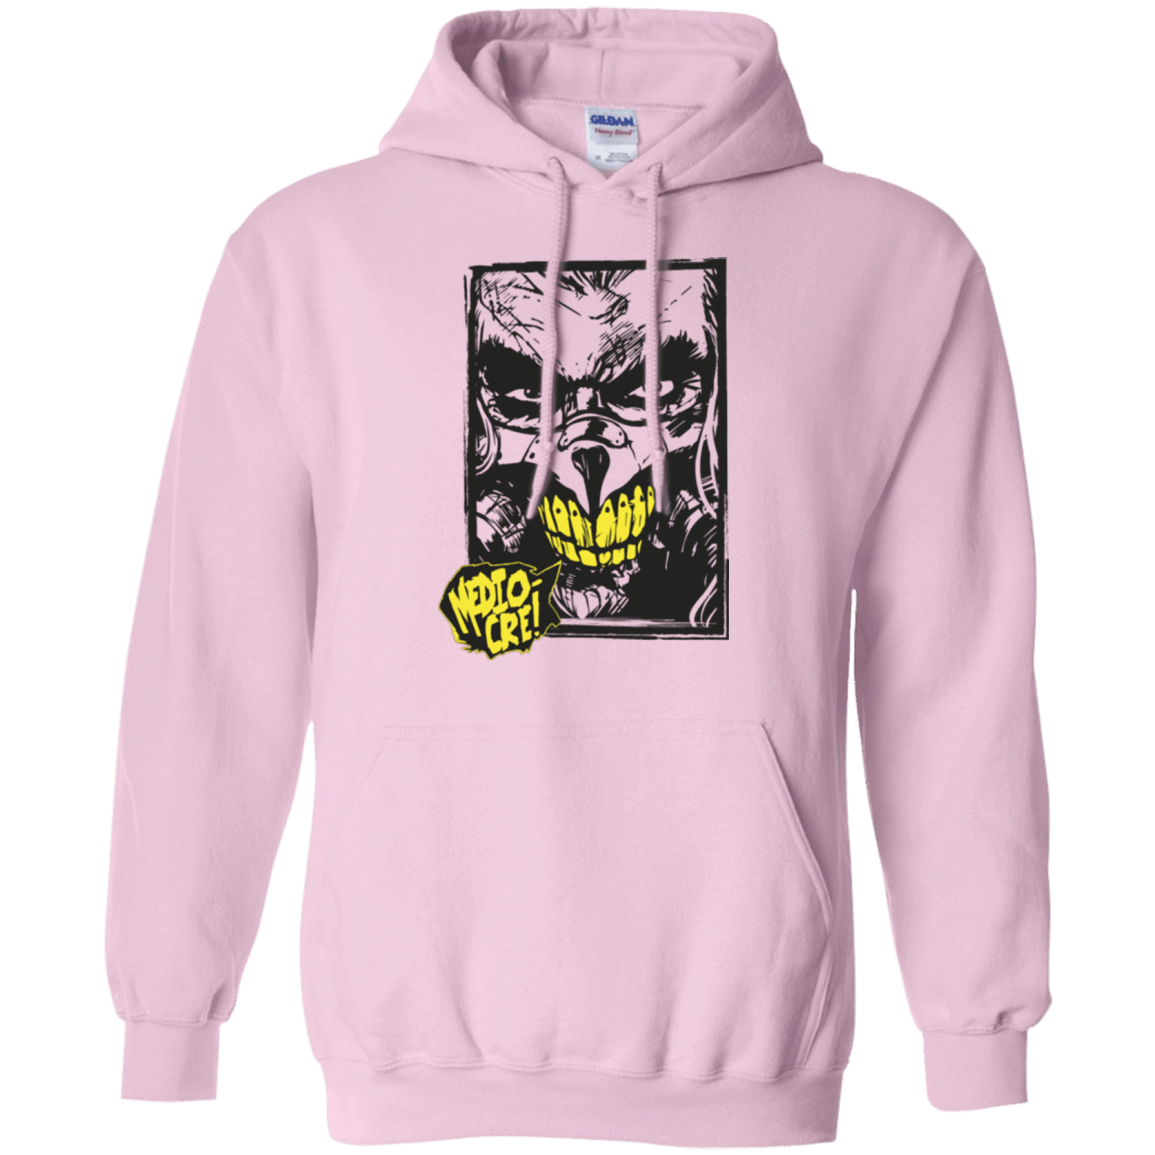 Sweatshirts Light Pink / Small Mediocre Pullover Hoodie